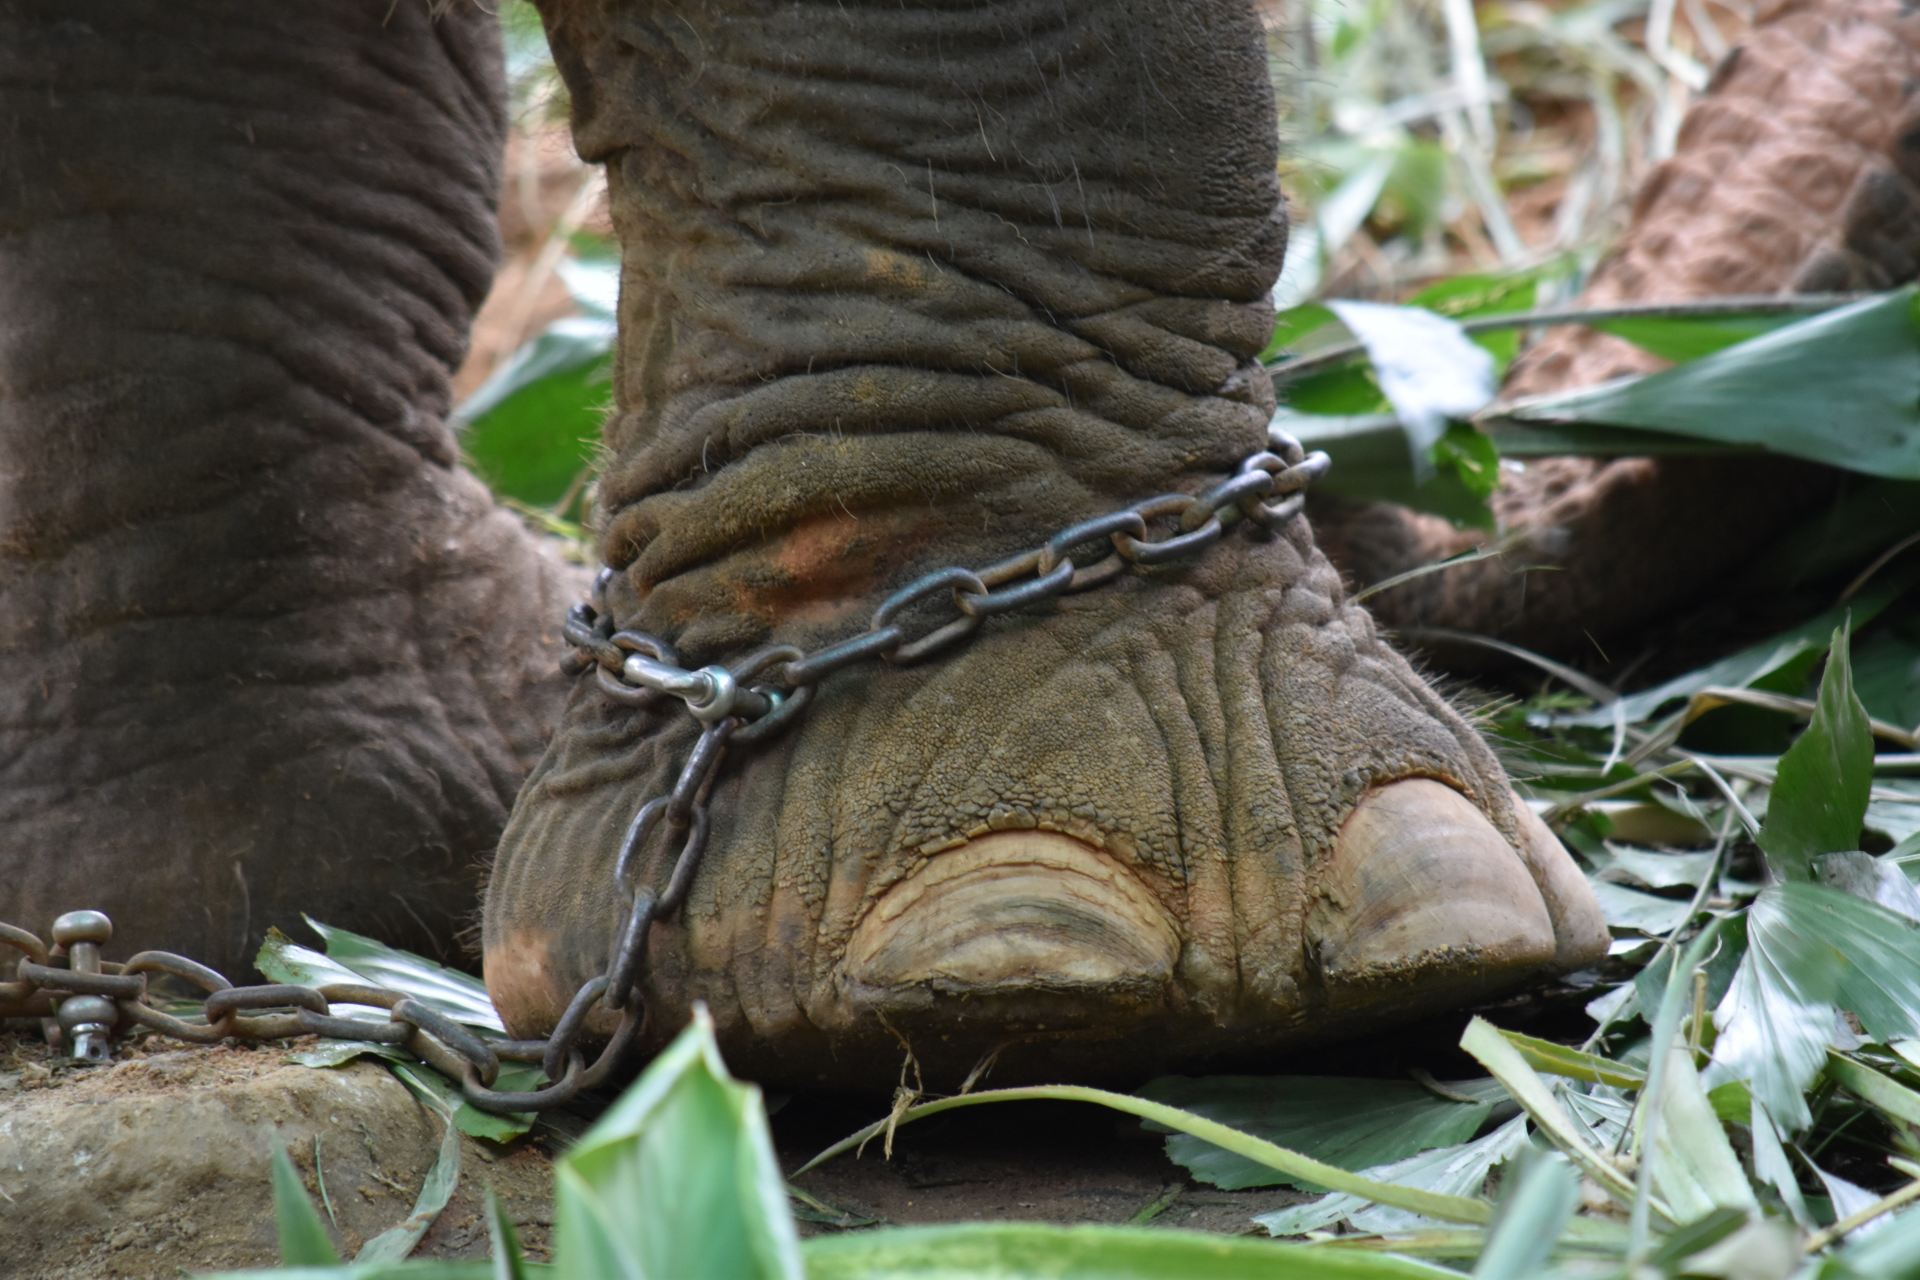 elephant's legs in chains